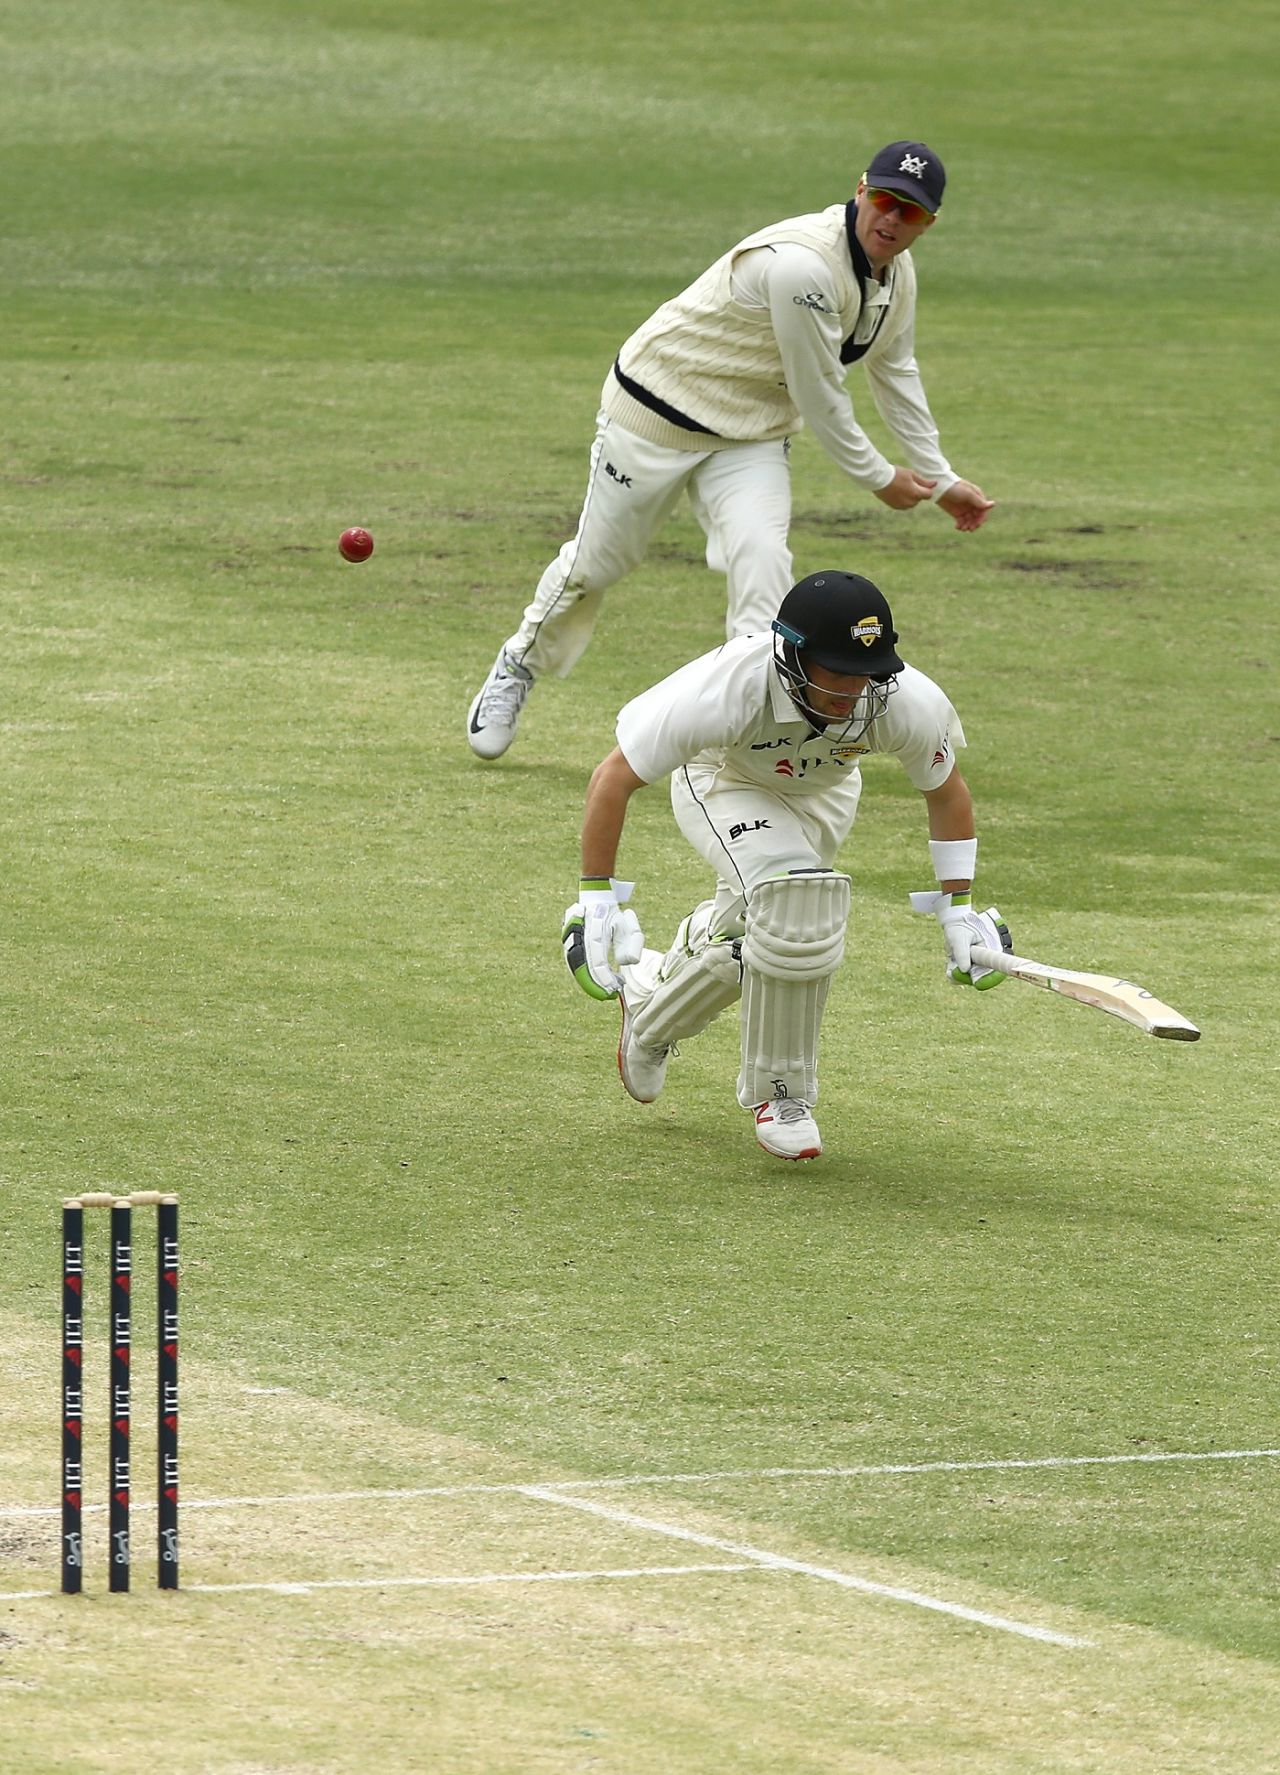 Josh Inglis scampers back to his crease as a throw is hurled at his end, Western Australia v Victoria, Sheffield Shield 2018-19, Perth, 3rd day, October 18, 2018